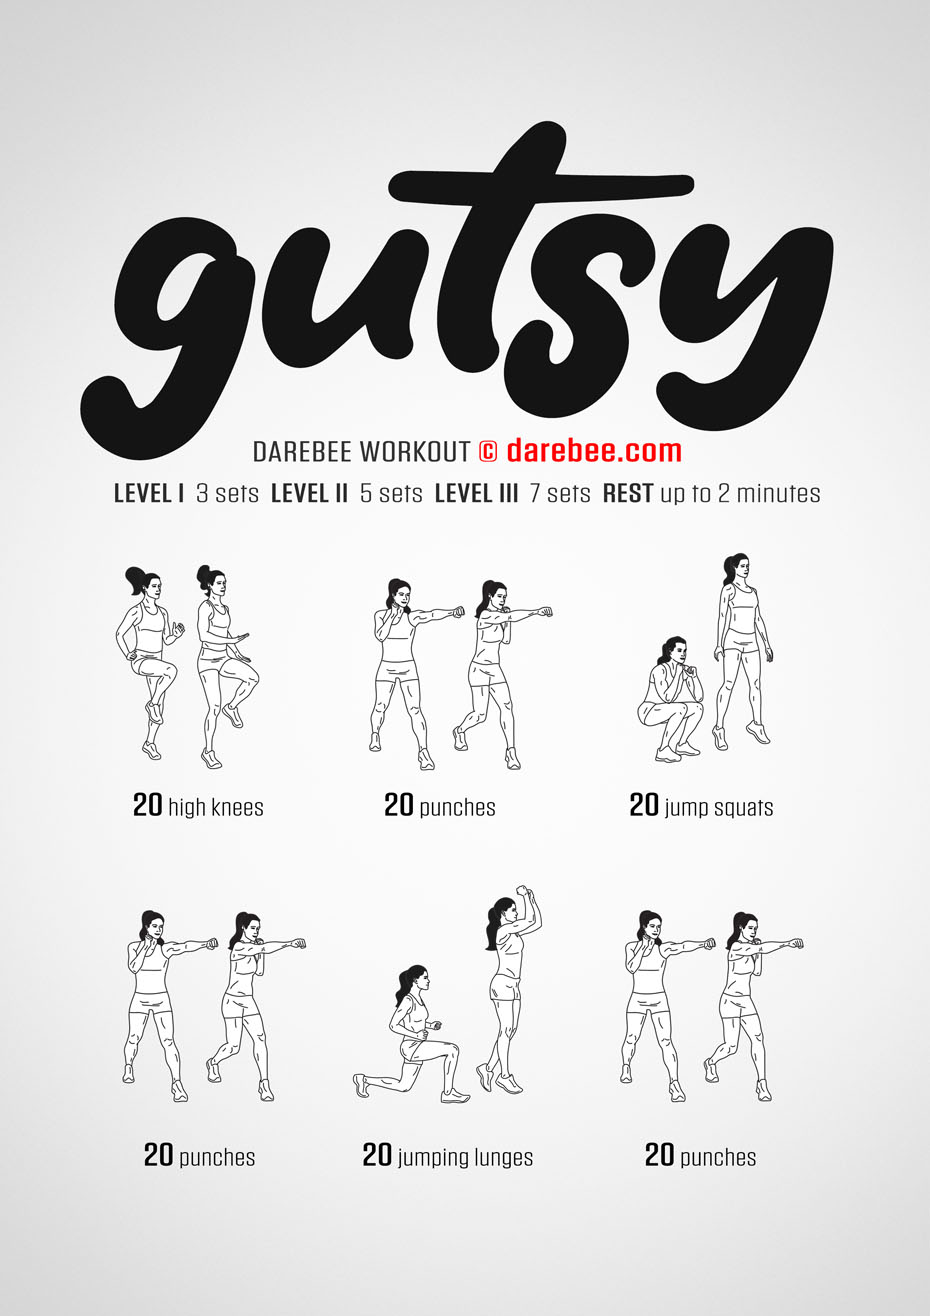 Gutsy is a Darebee home fitness workout that uses a combination of large and small body movements to work the lungs and pump the heart.